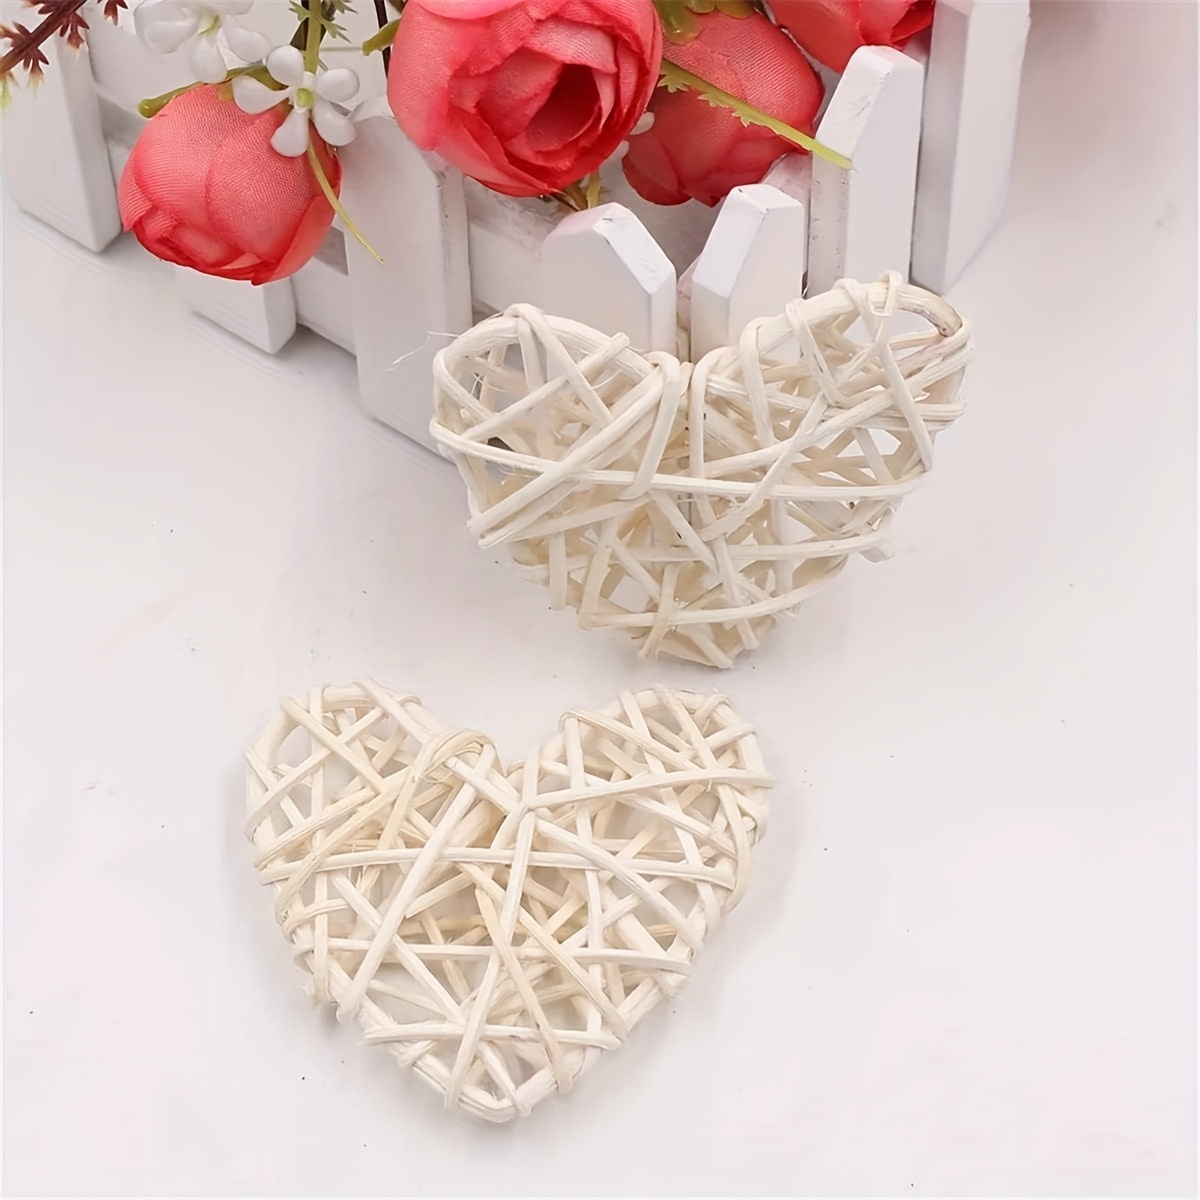 Geosar 24 Pieces Heart Rattan Balls, Valentines Day Rattan Balls Natural  Wicker Heart Shaped Balls 4 Colors for Valentine's Day Wedding DIY Craft  Home